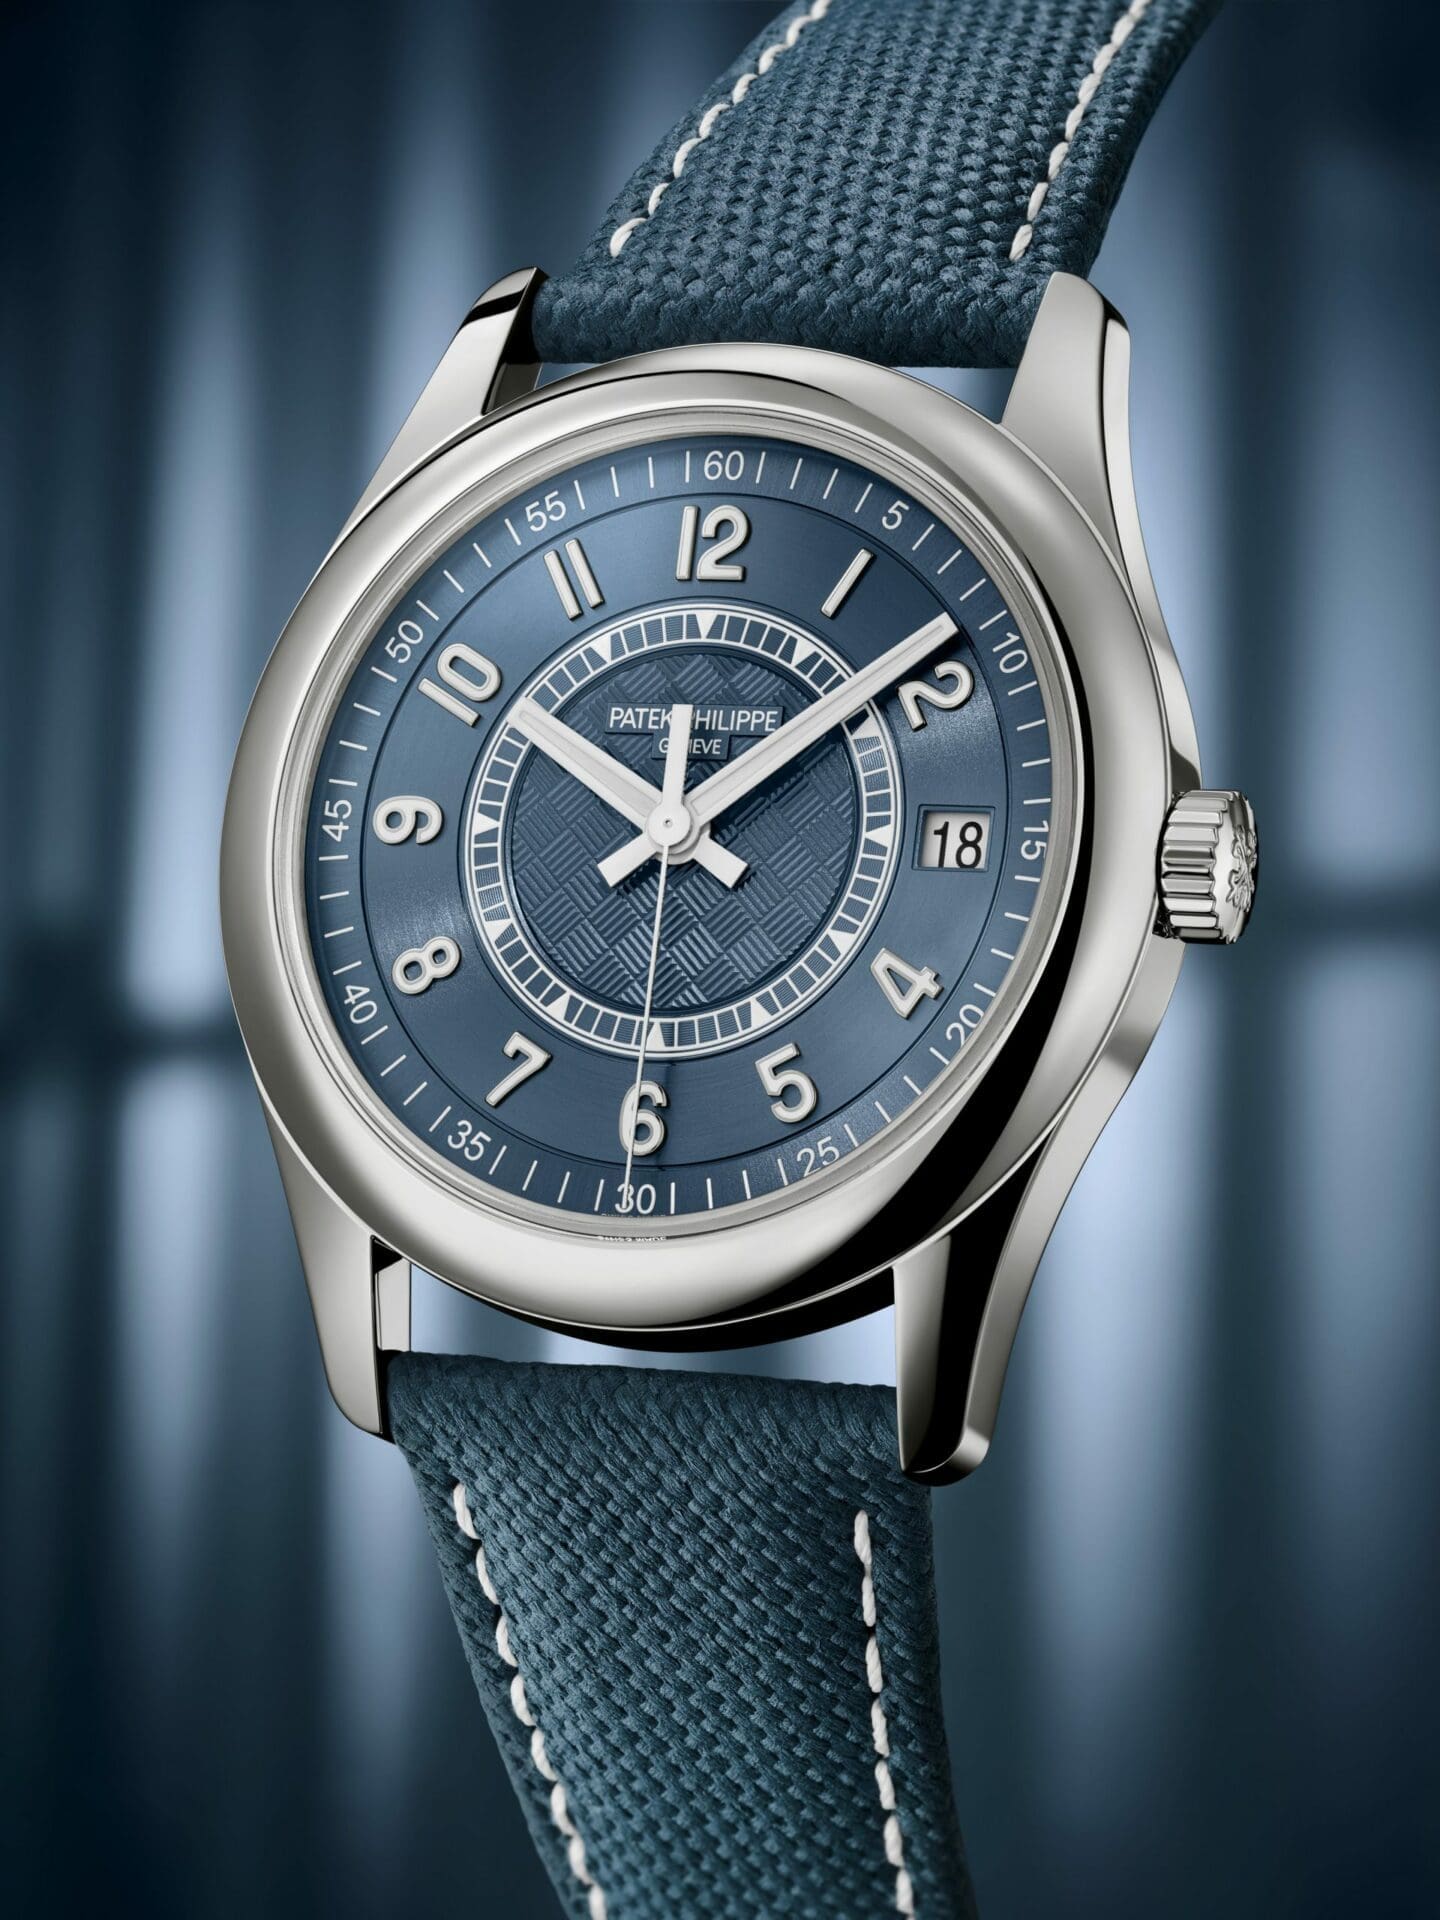 The 4 details that make the the all-new Patek Philippe Calatrava Ref. 6007A-001 Limited Edition so compelling